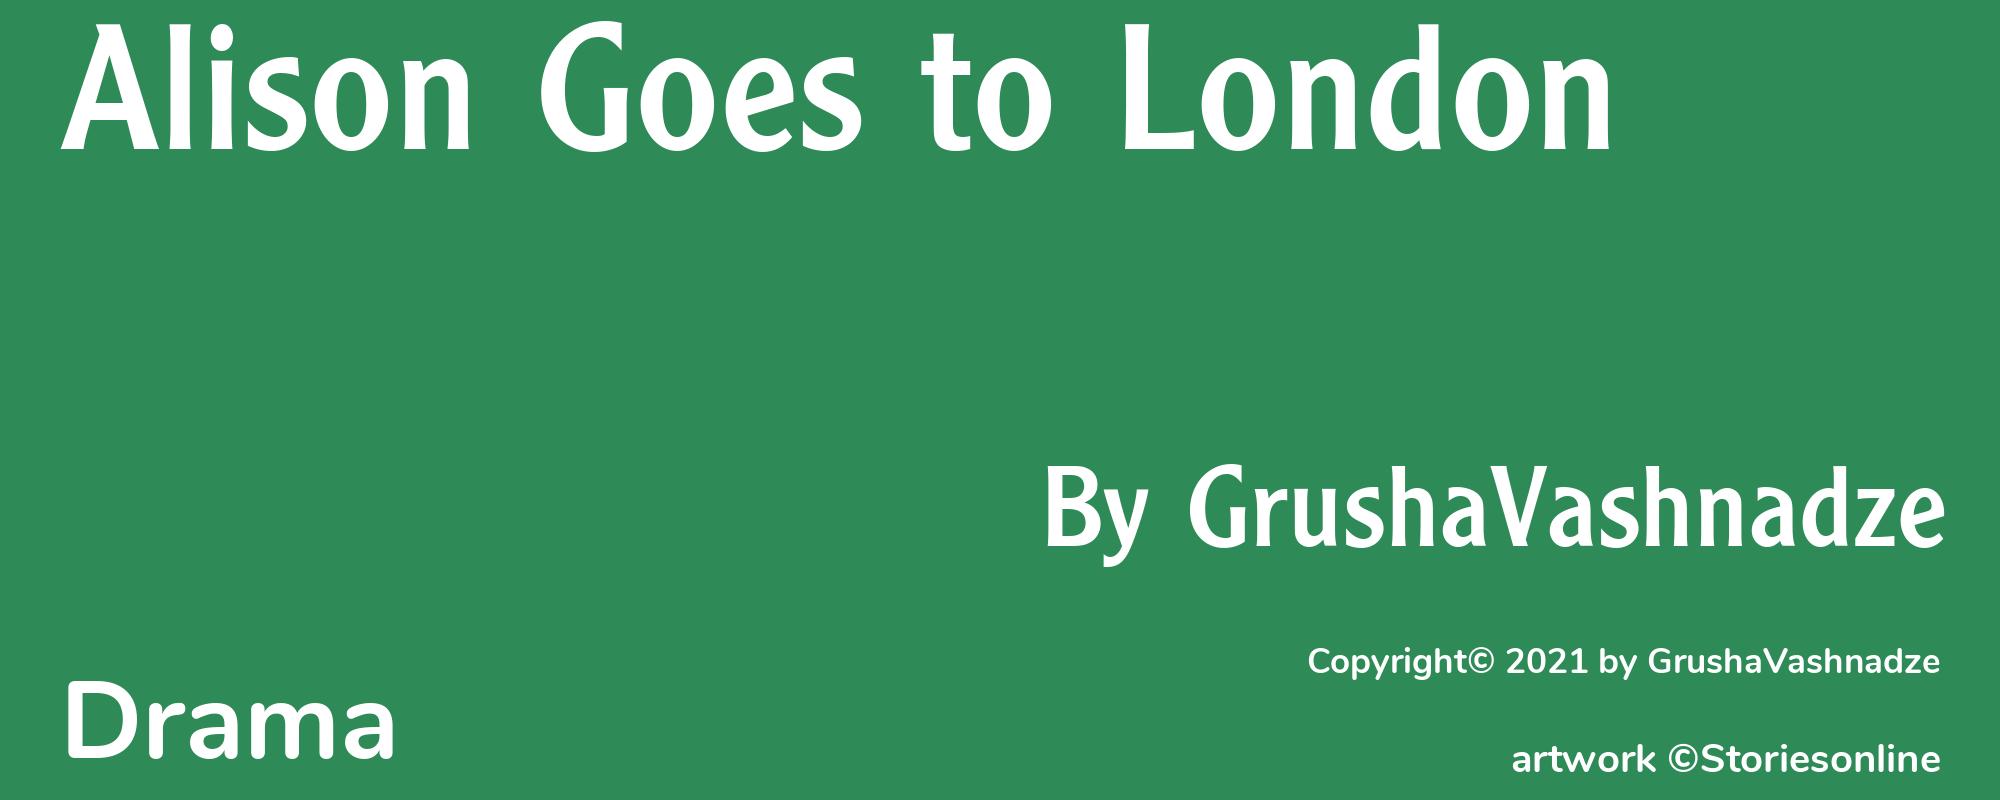 Alison Goes to London - Cover